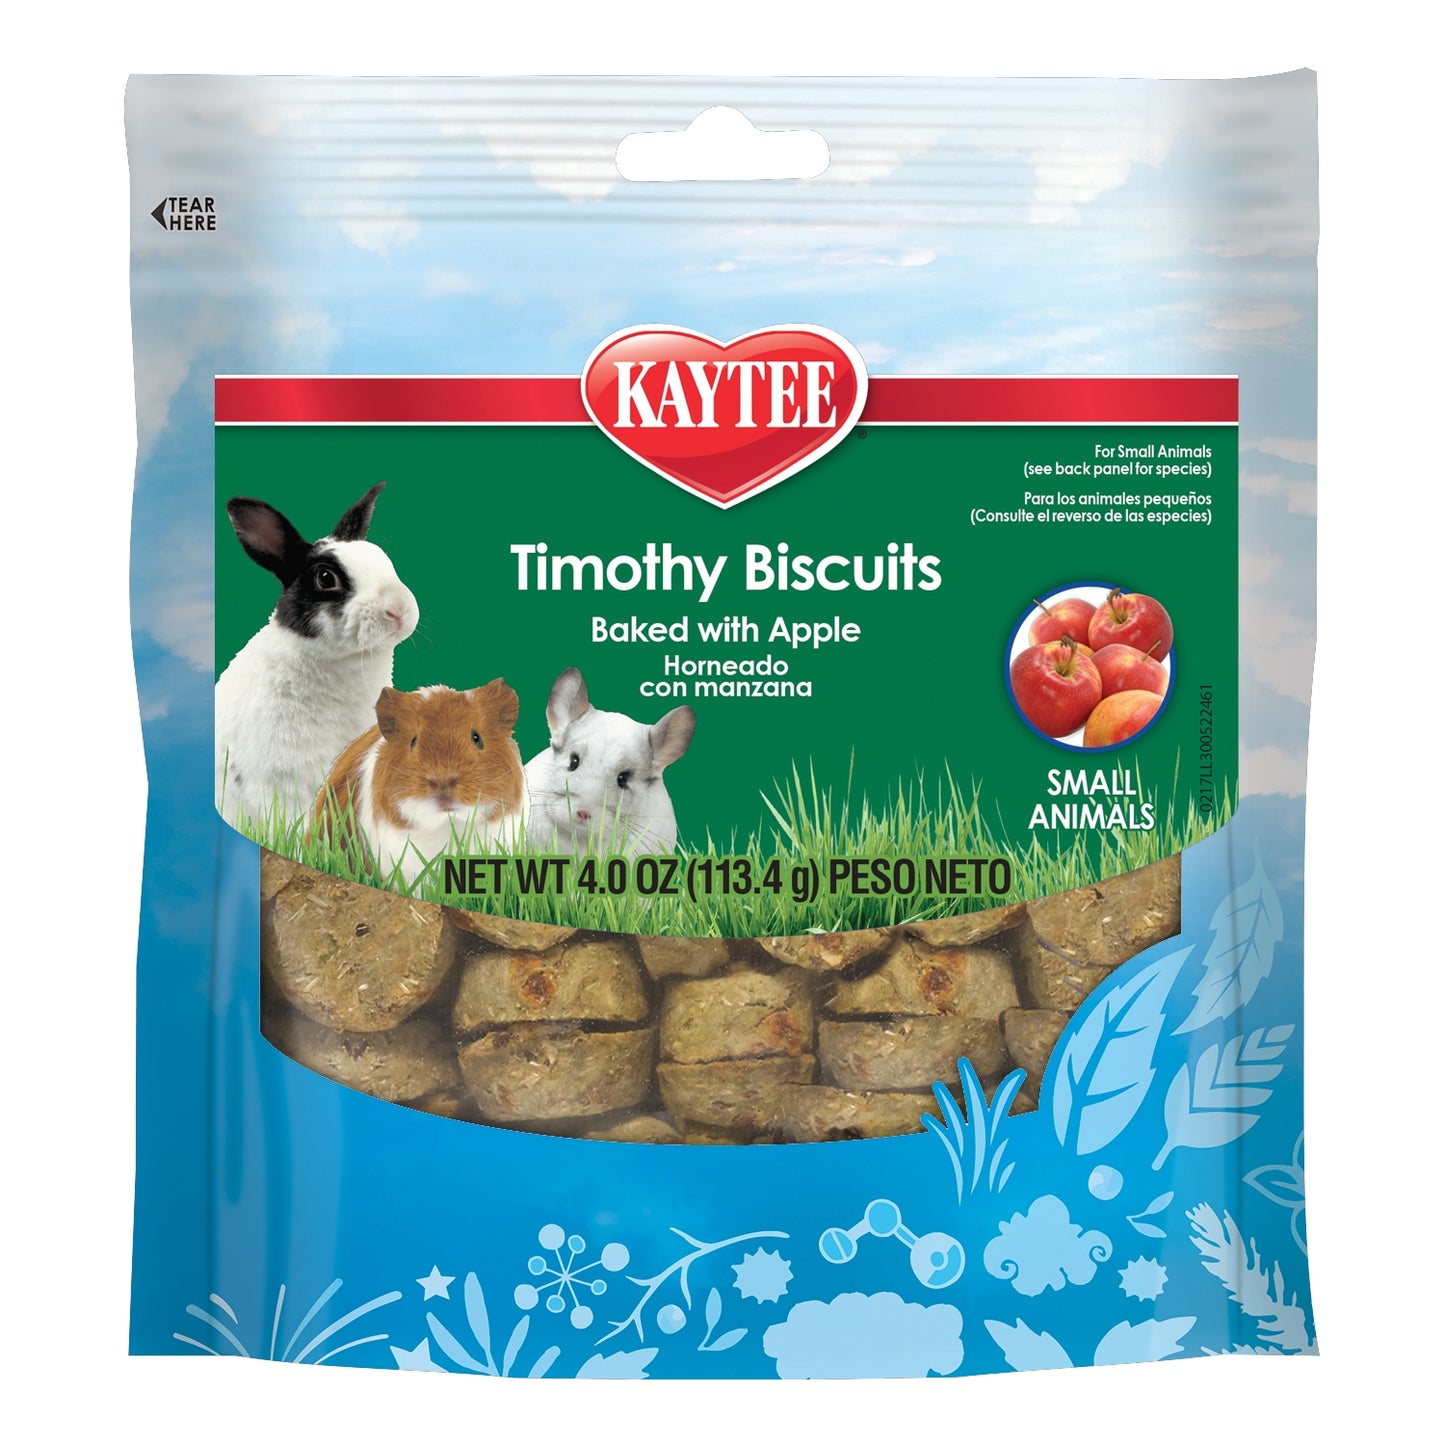 Kaytee Timothy Biscuits Baked Apple Treat For Small Animals, 4-oz Bag